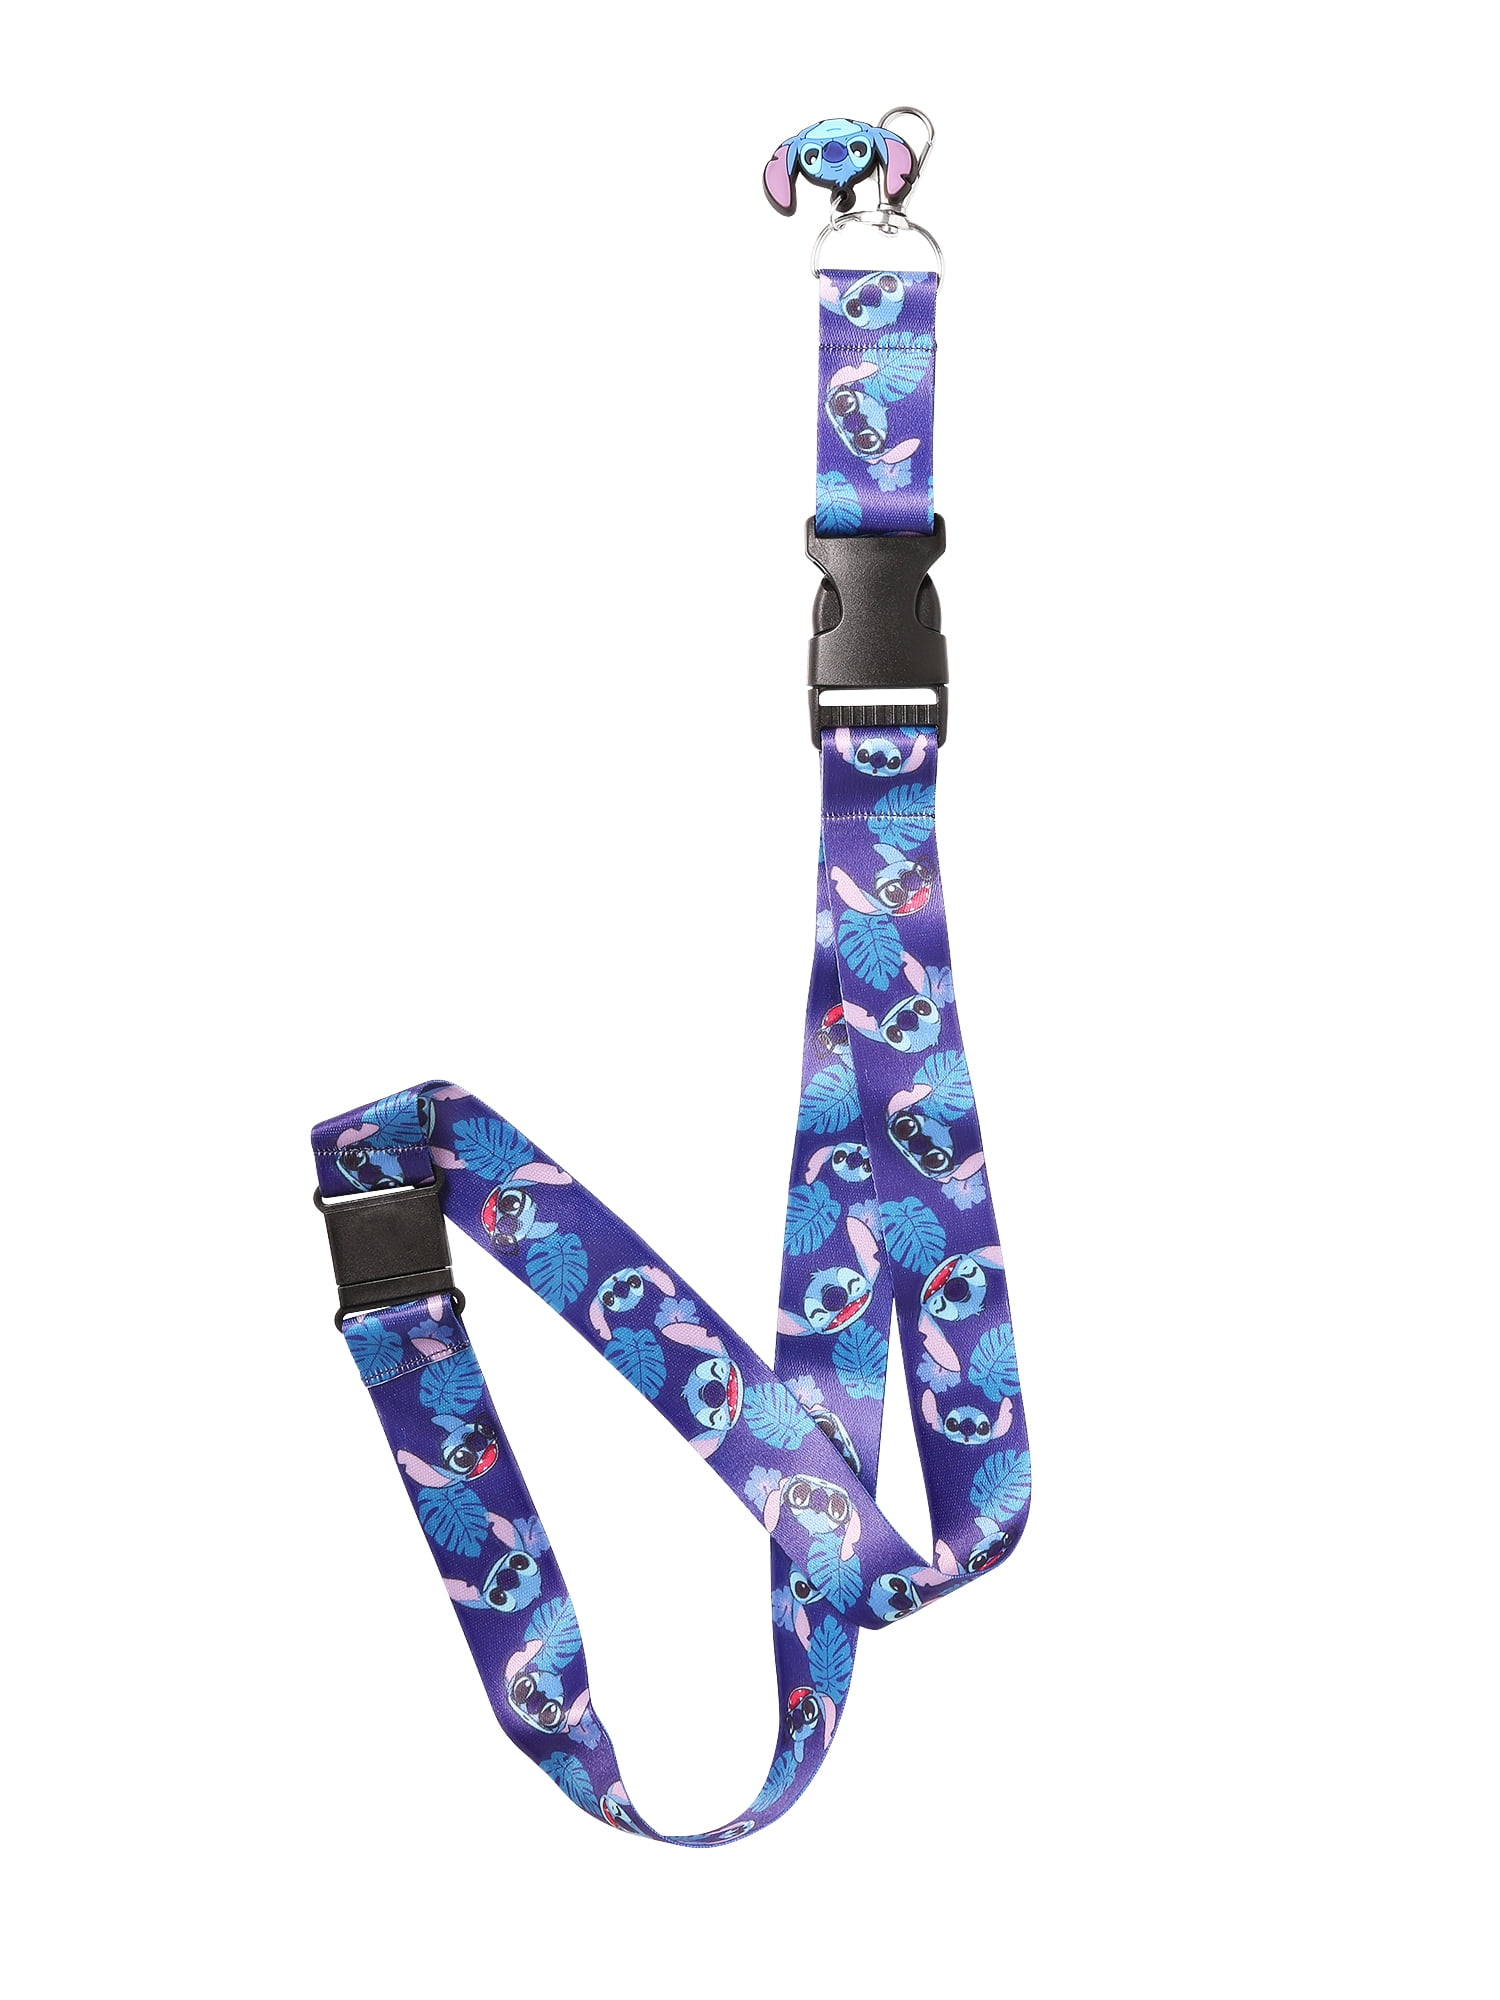 Paracord Planet 5/8 Inch Side Release Buckles Ideal for Paracord Bracelet Vibrant Colors Available Packs of 100 Lanyard 